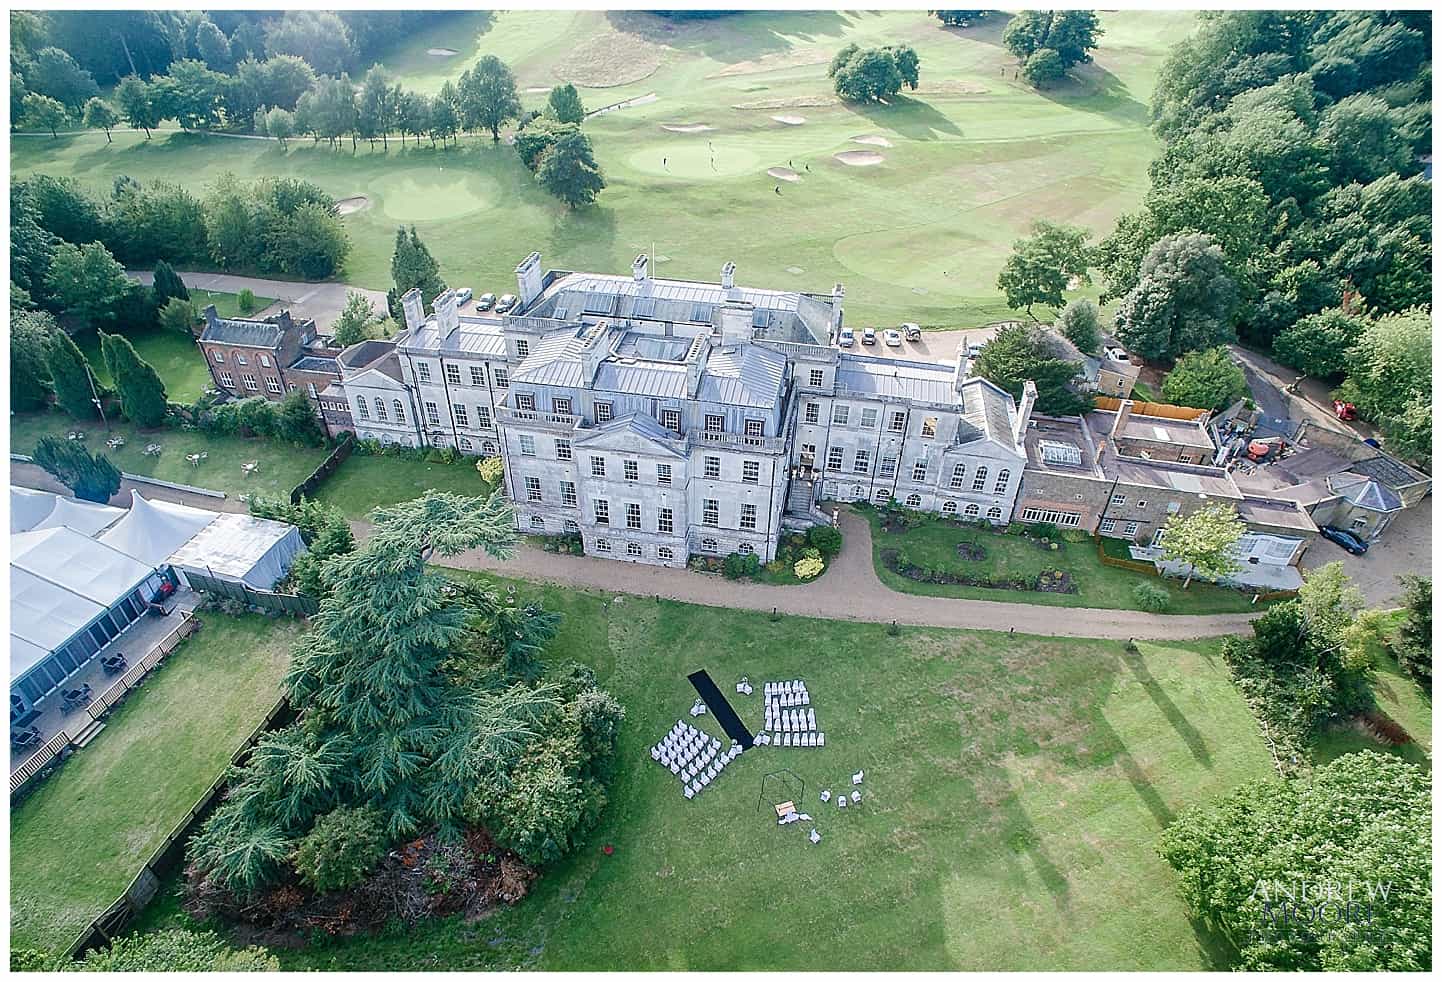 Aerial View of Addington Palace in Surrey